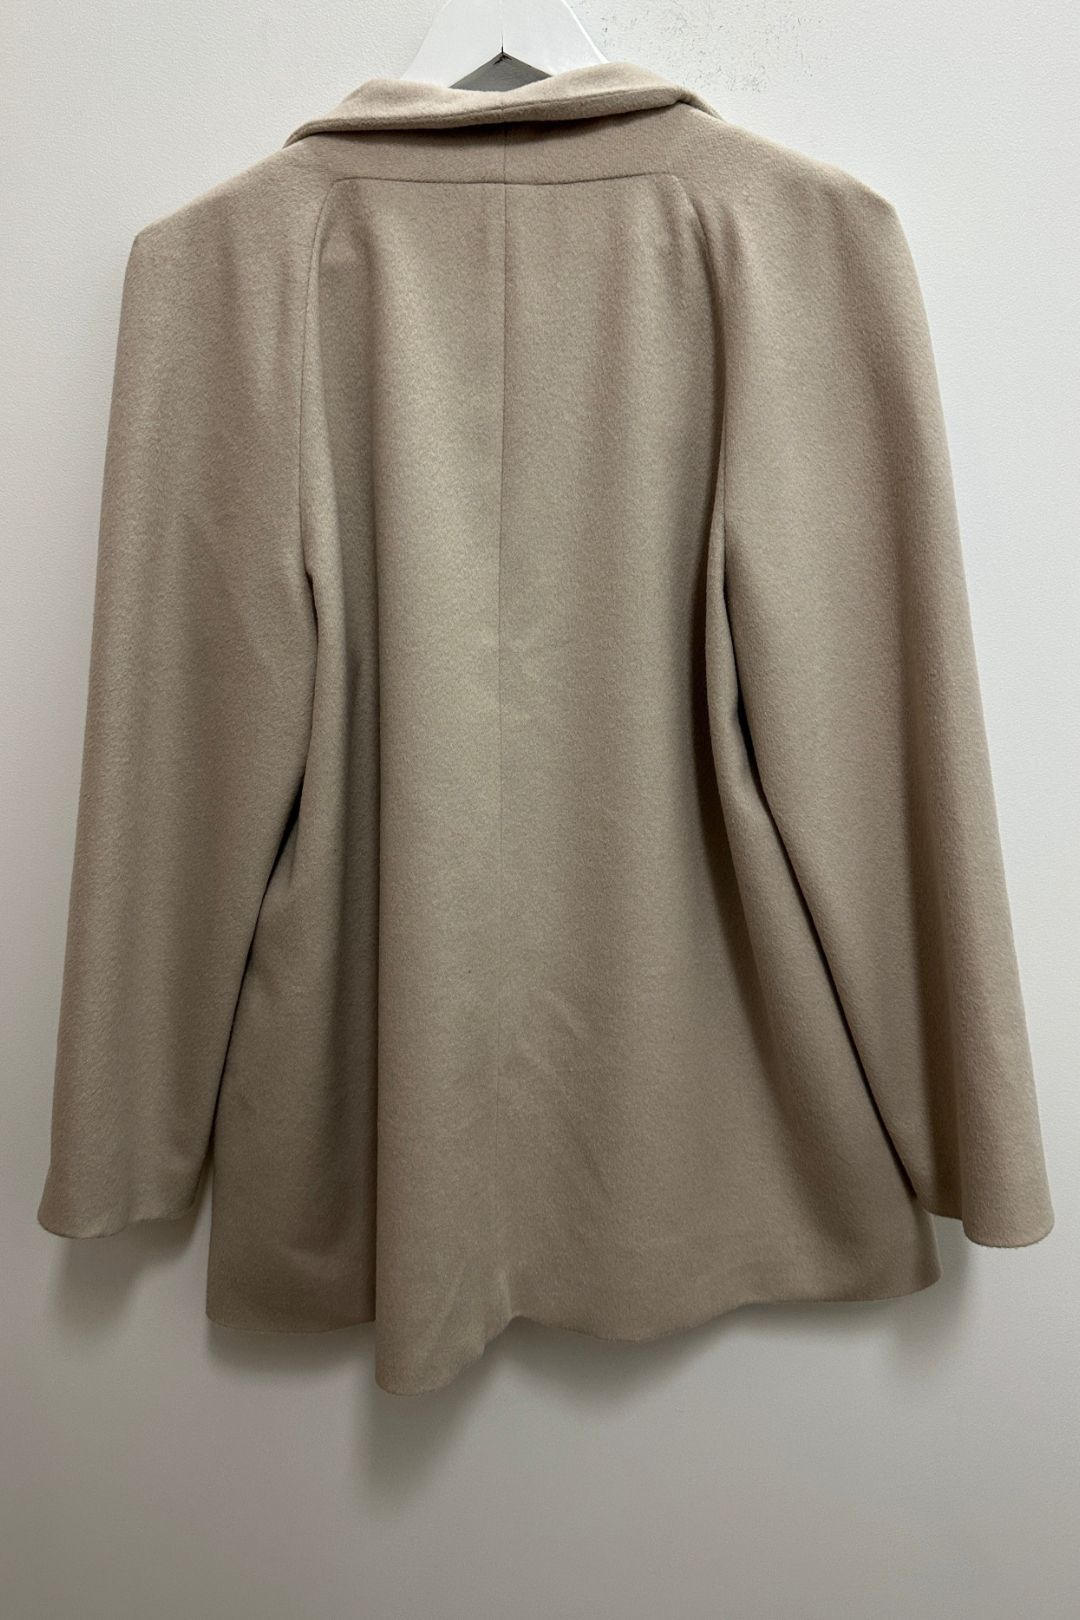 Hip Length Coat In Taupe